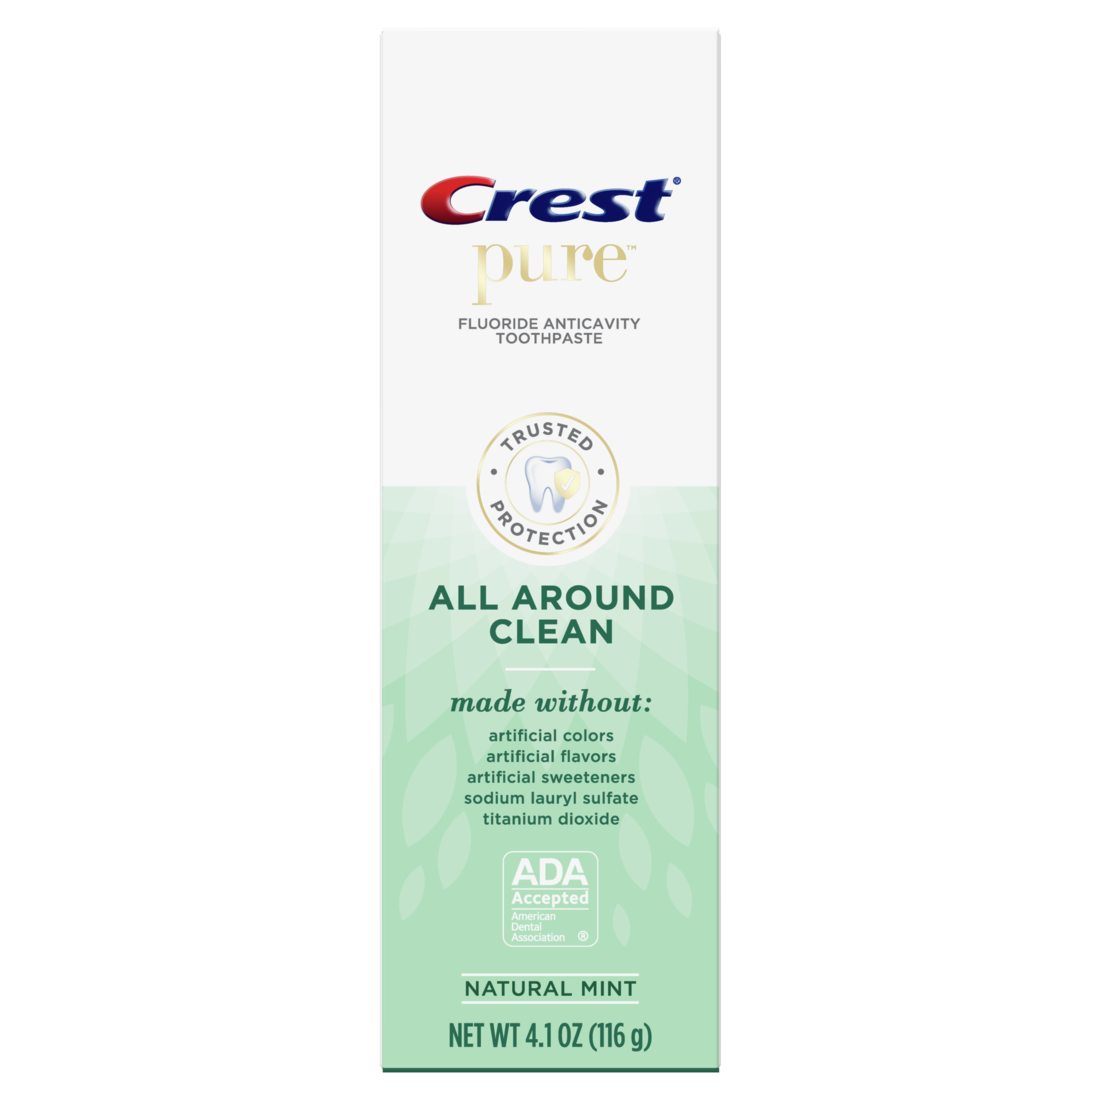 Crest Pure All Around Clean Toothpaste with Fluoride Anti-Cavity Protection, SLS Free, Natural Mint - 4.1oz/24pk